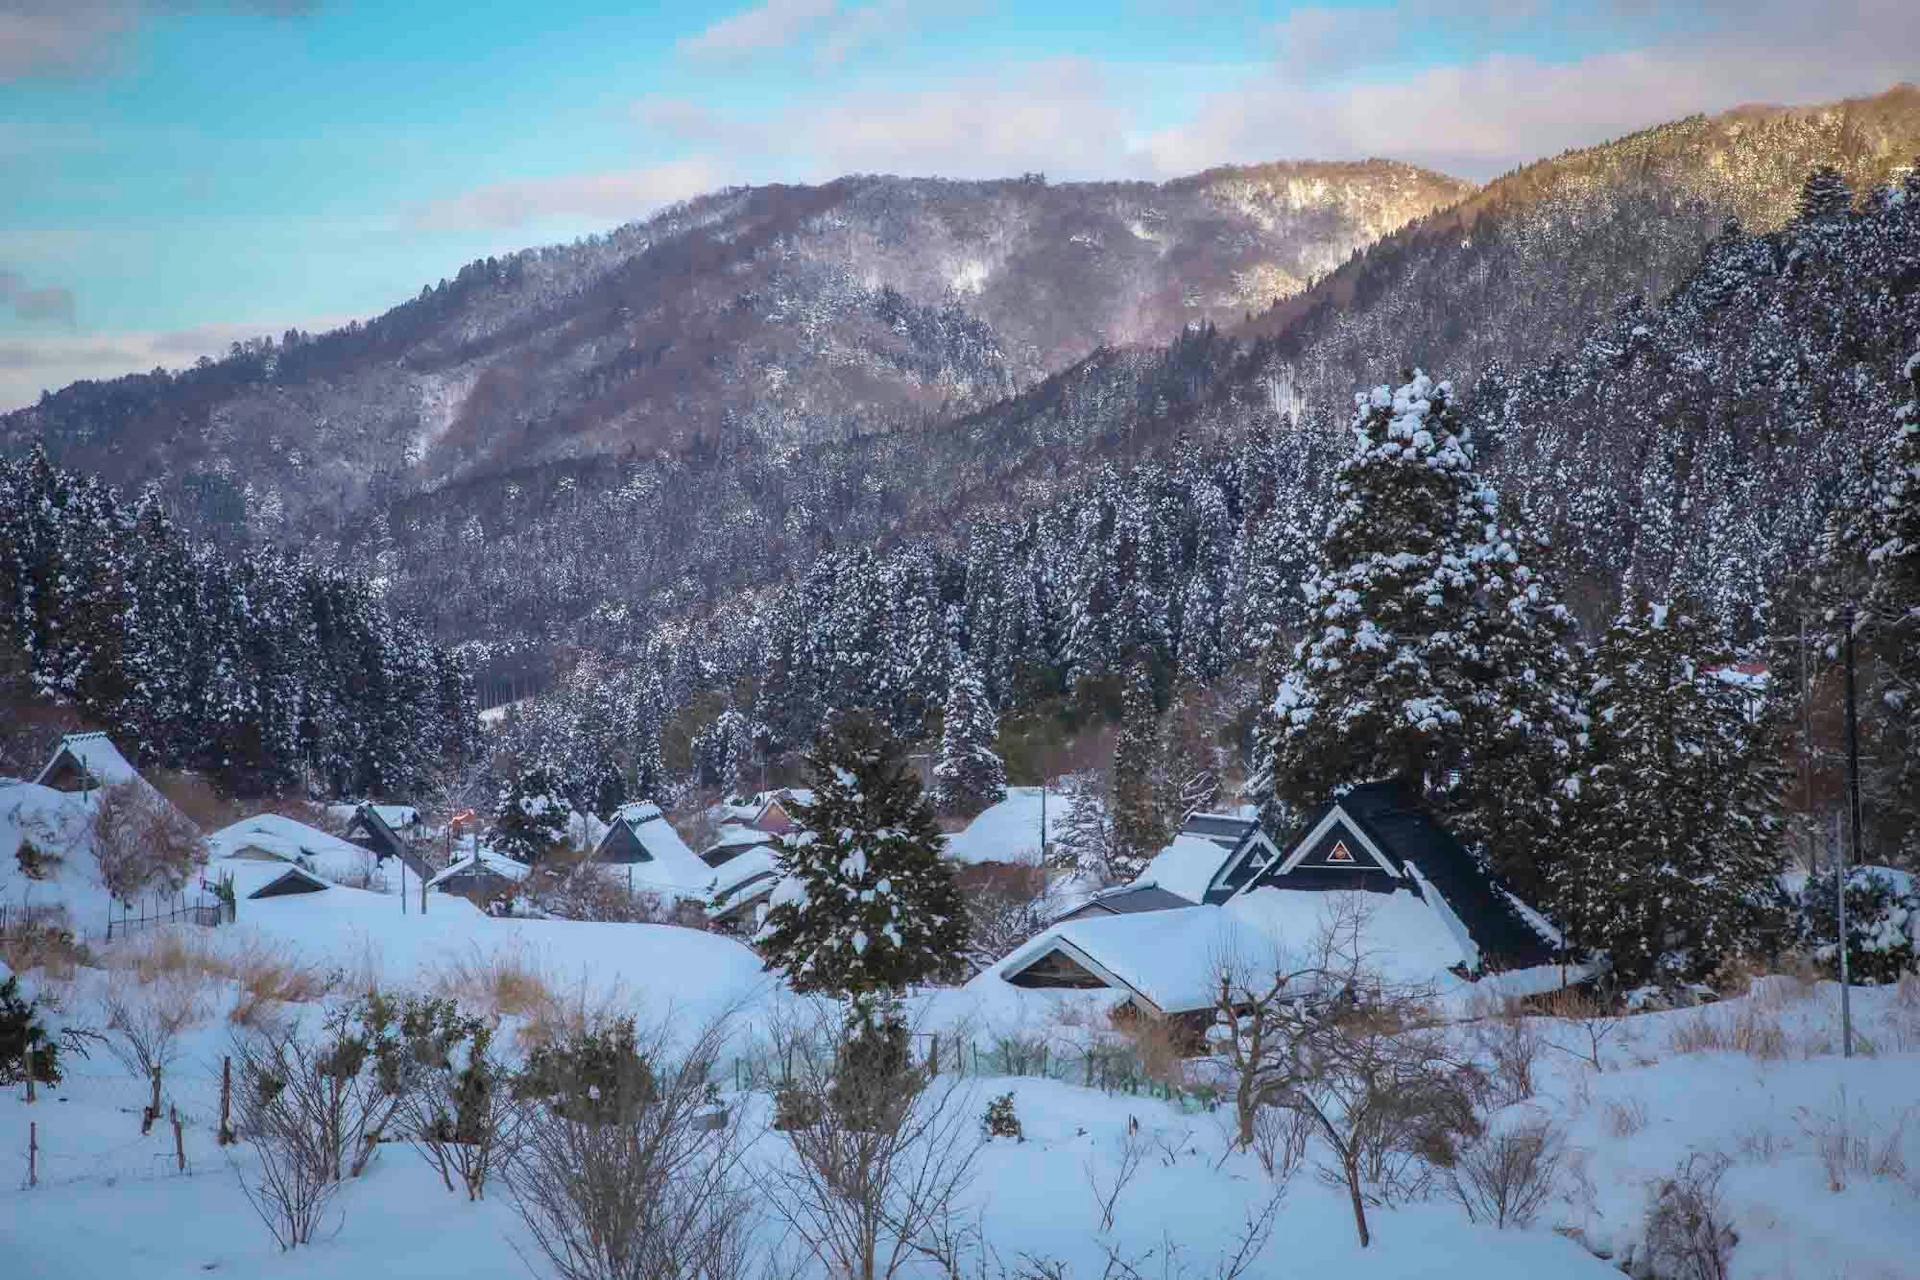 Hanase Village, located in the northern mountains of Kyoto gets buried in snow during the winter months. Photo source: James Saunders-Wyndham